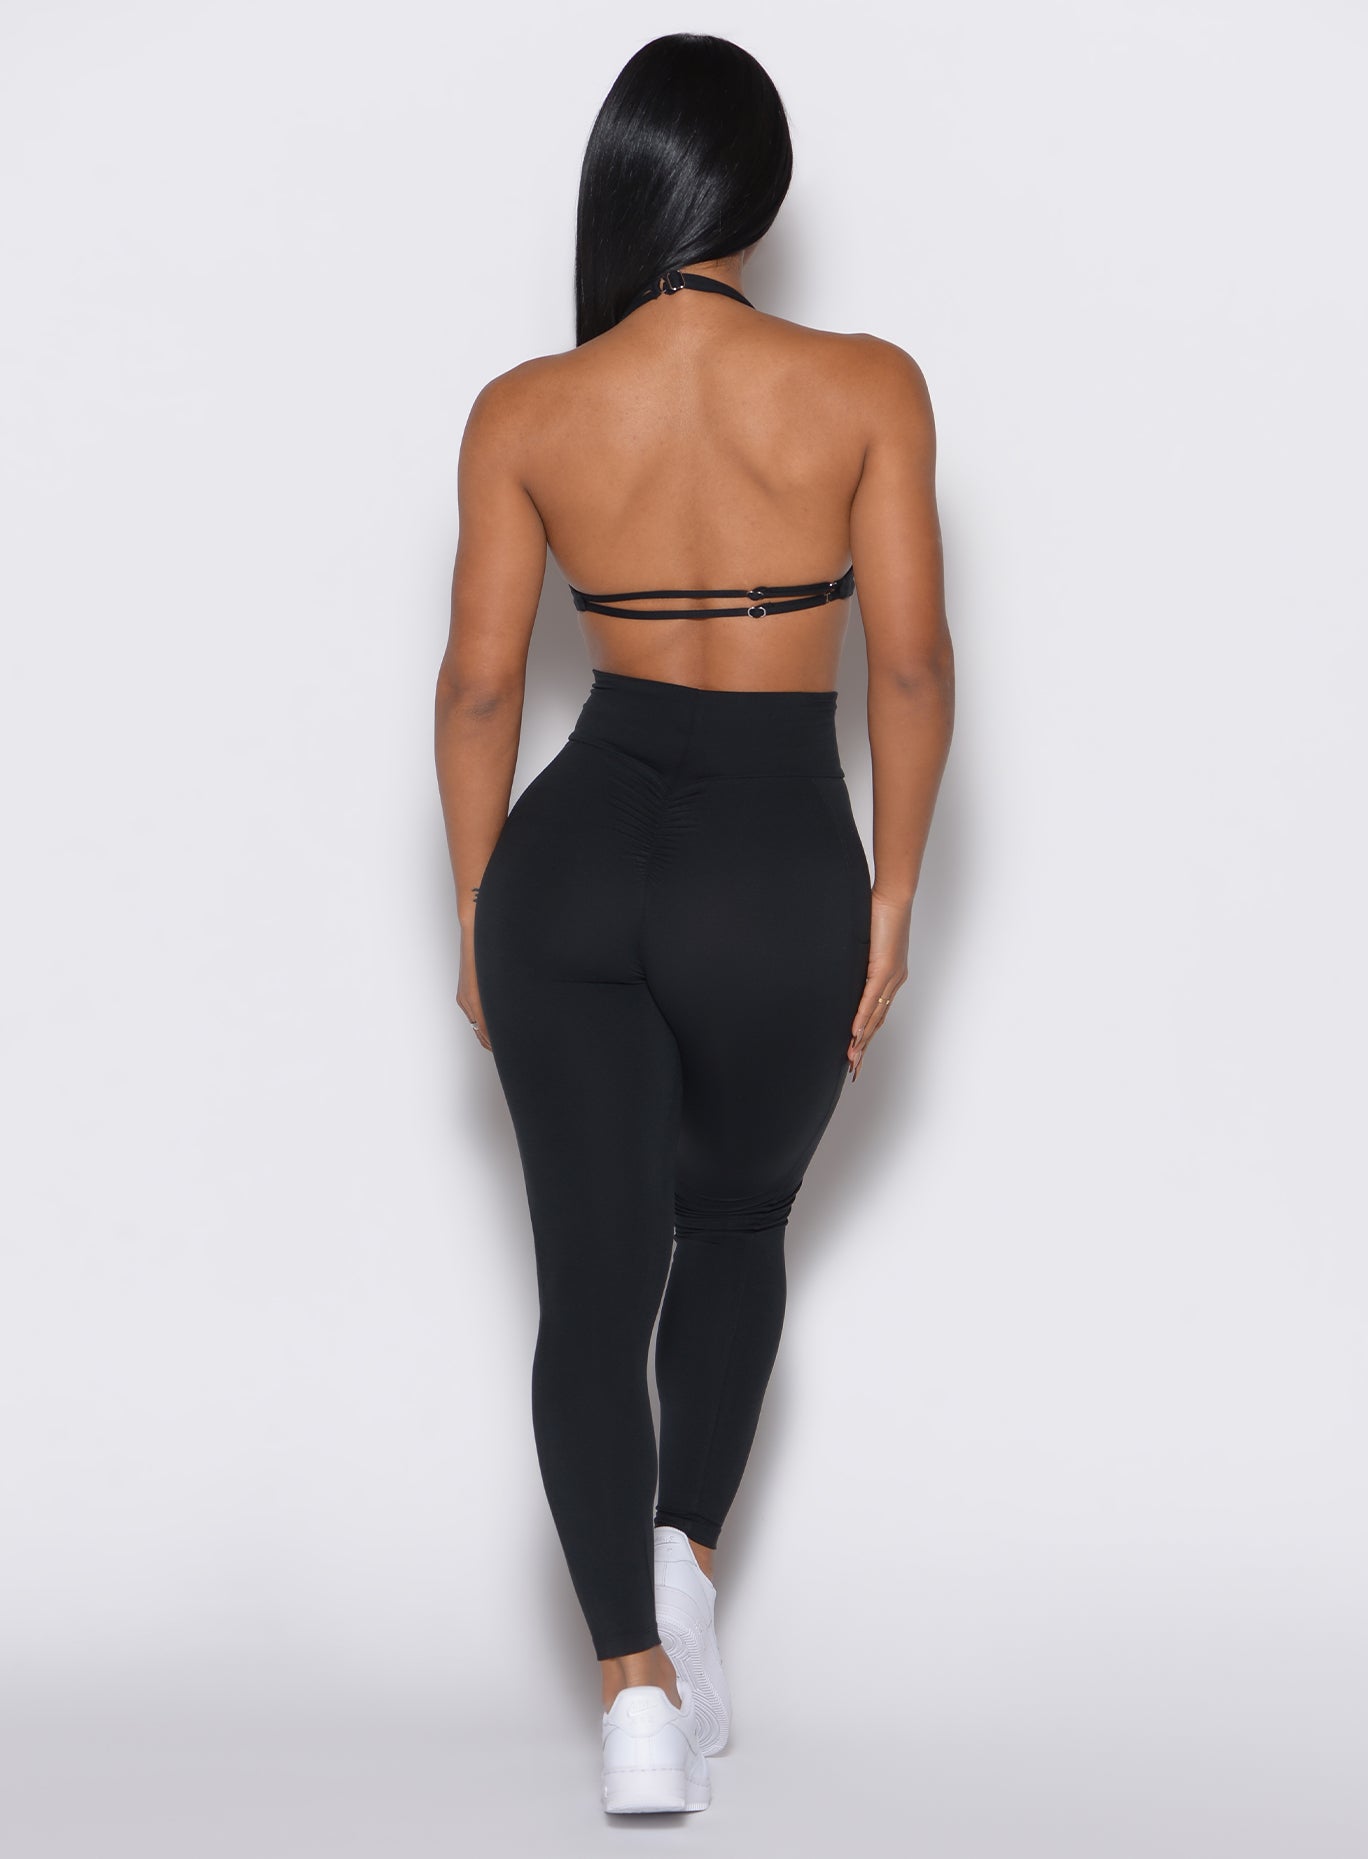 back profile view of a model wearing our black curves leggings along with a matching sports bra 